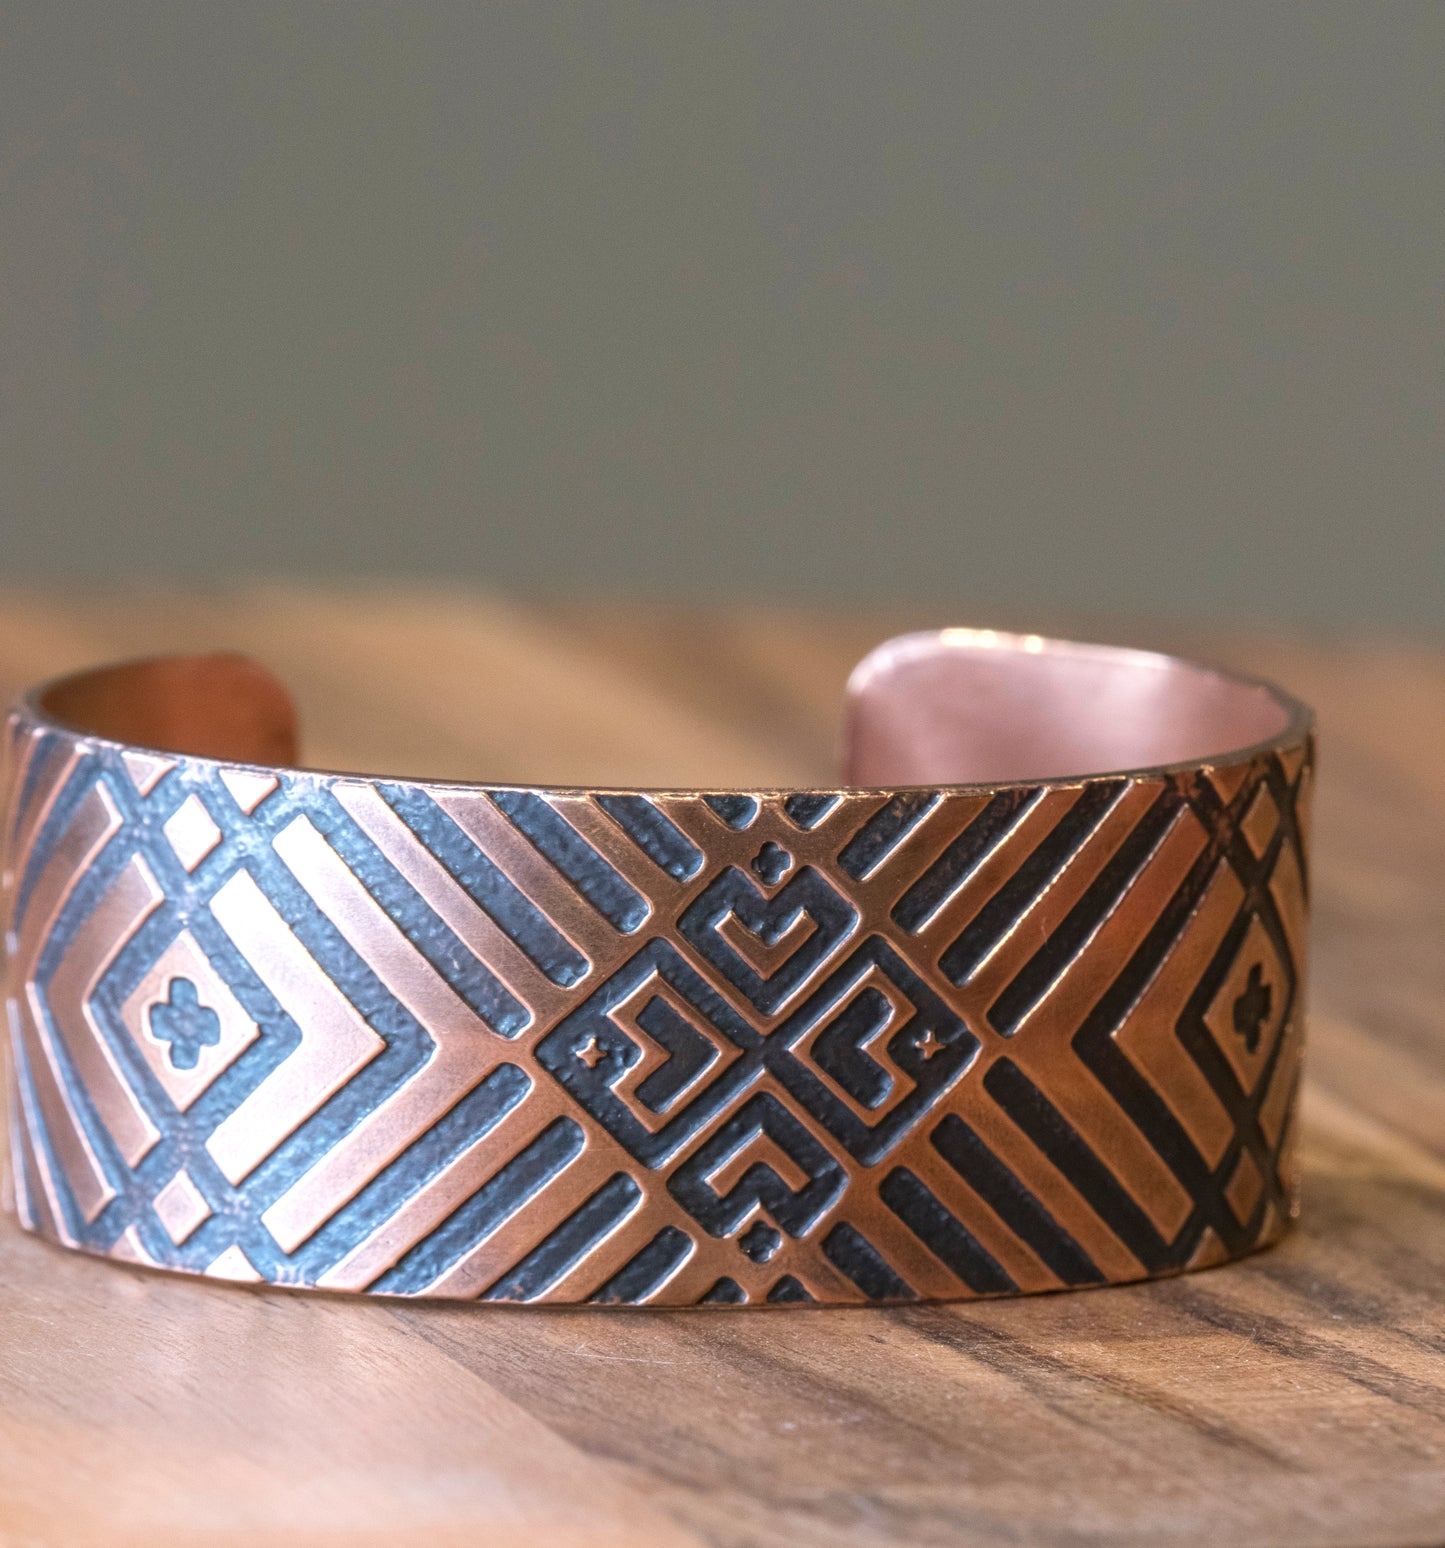 Kassie Kussman - Copper Heart Basket Wide Cuff - Intertribal Creatives by Running Strong for American Indian Youth